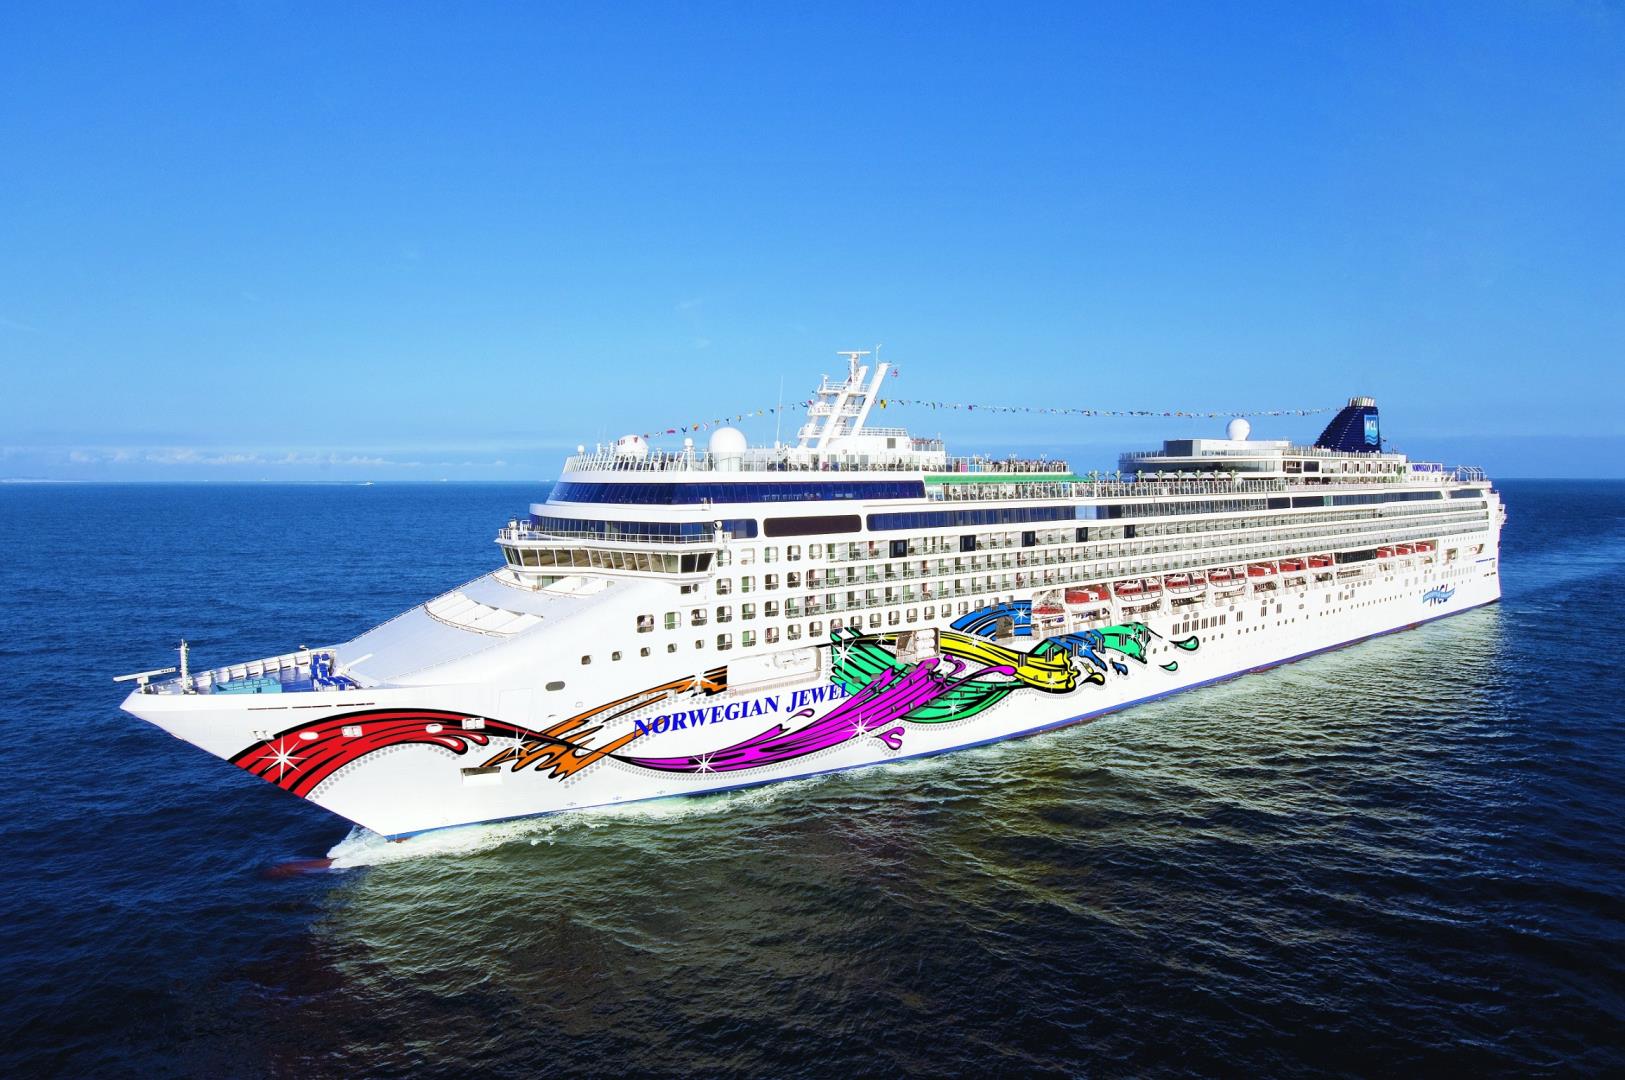 9-day Cruise to Pacific Coast Wine Country: San Francisco, Astoria & Ensenada to Los Angeles from Vancouver, British Columbia on Norwegian Jewel